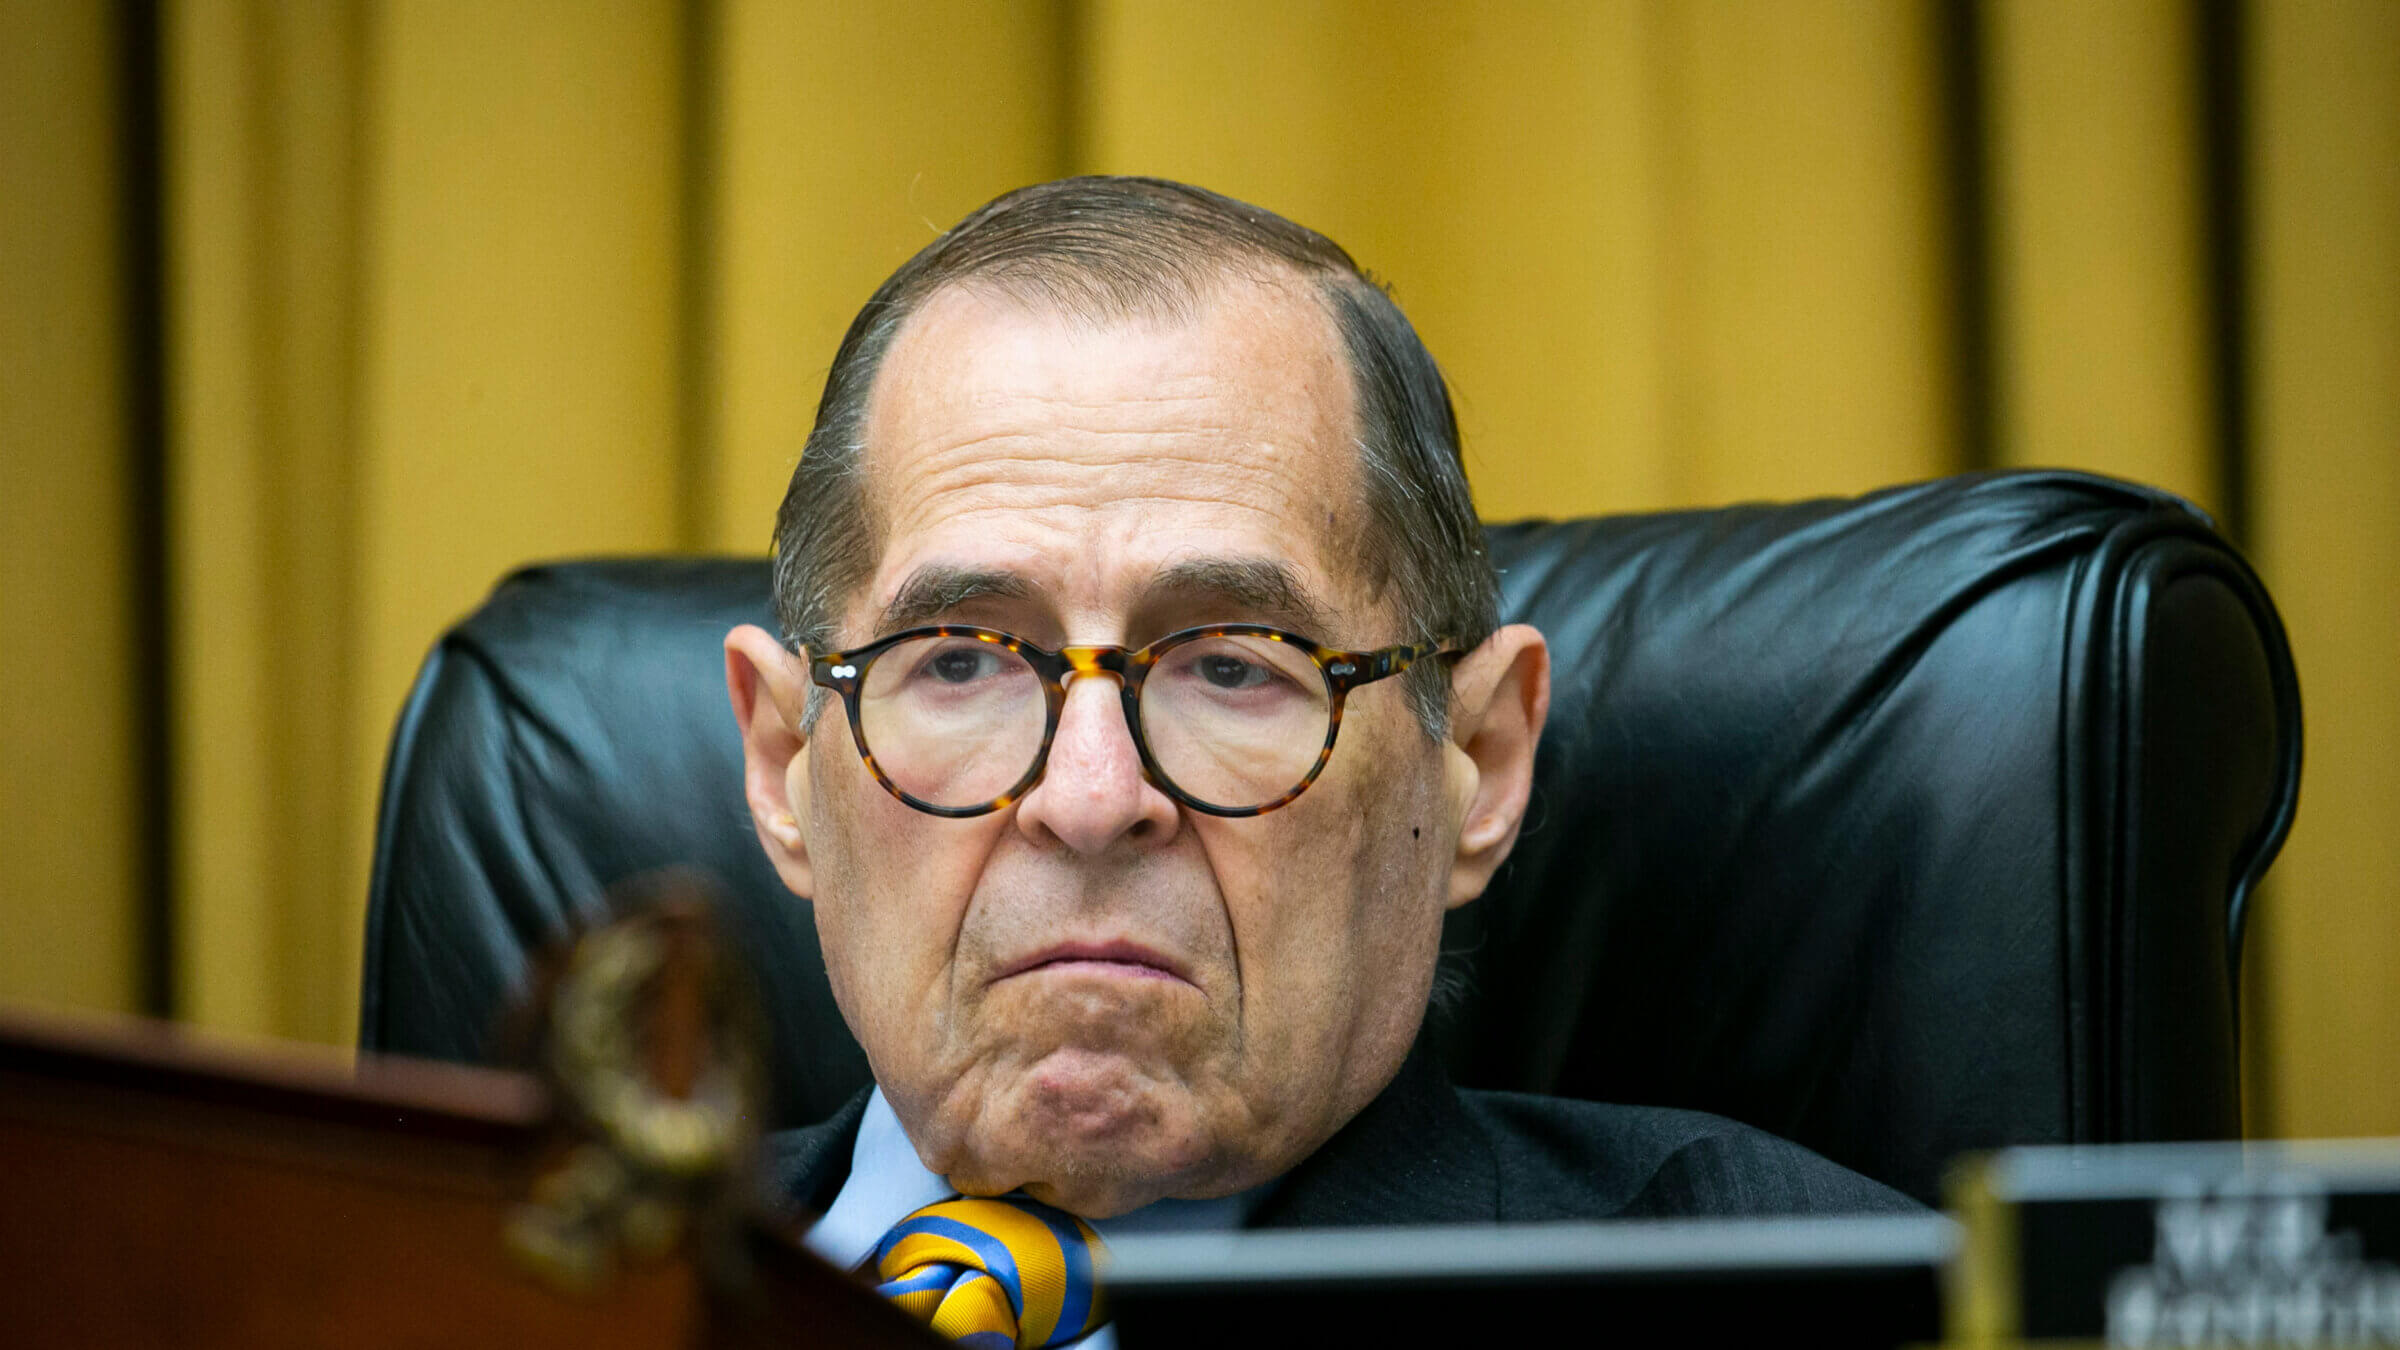 Rep. Jerrold Nadler, chairman of the House Judiciary Committee, during a markup of “Protecting Our Kids Act” in Washington, D.C., on June 2, 2022. 